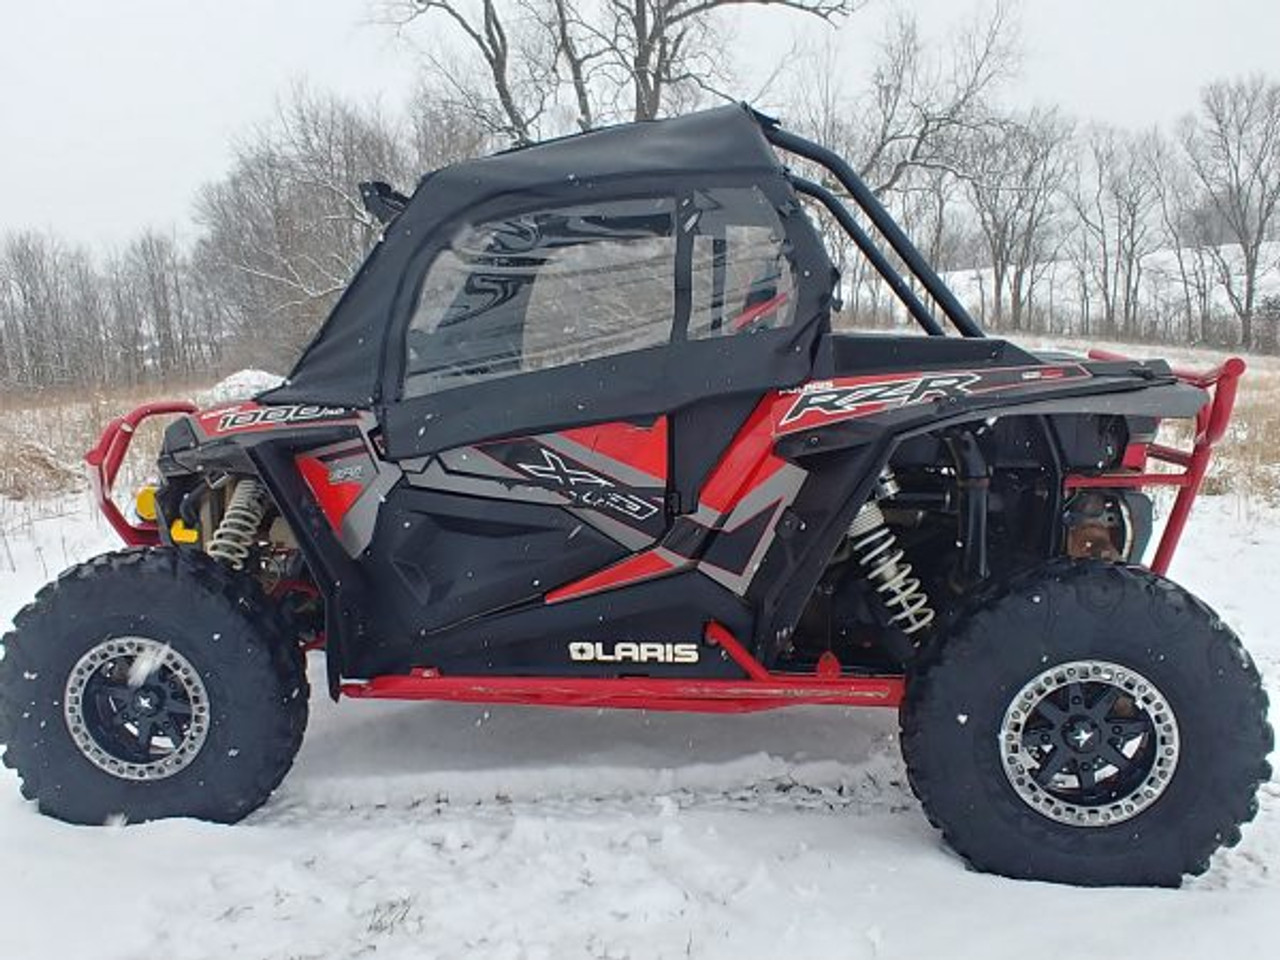 3 Star side x side accessories Polaris RZR XP1000/XP Turbo/S1000 Full Cab Enclosure for Hard Windshield side view